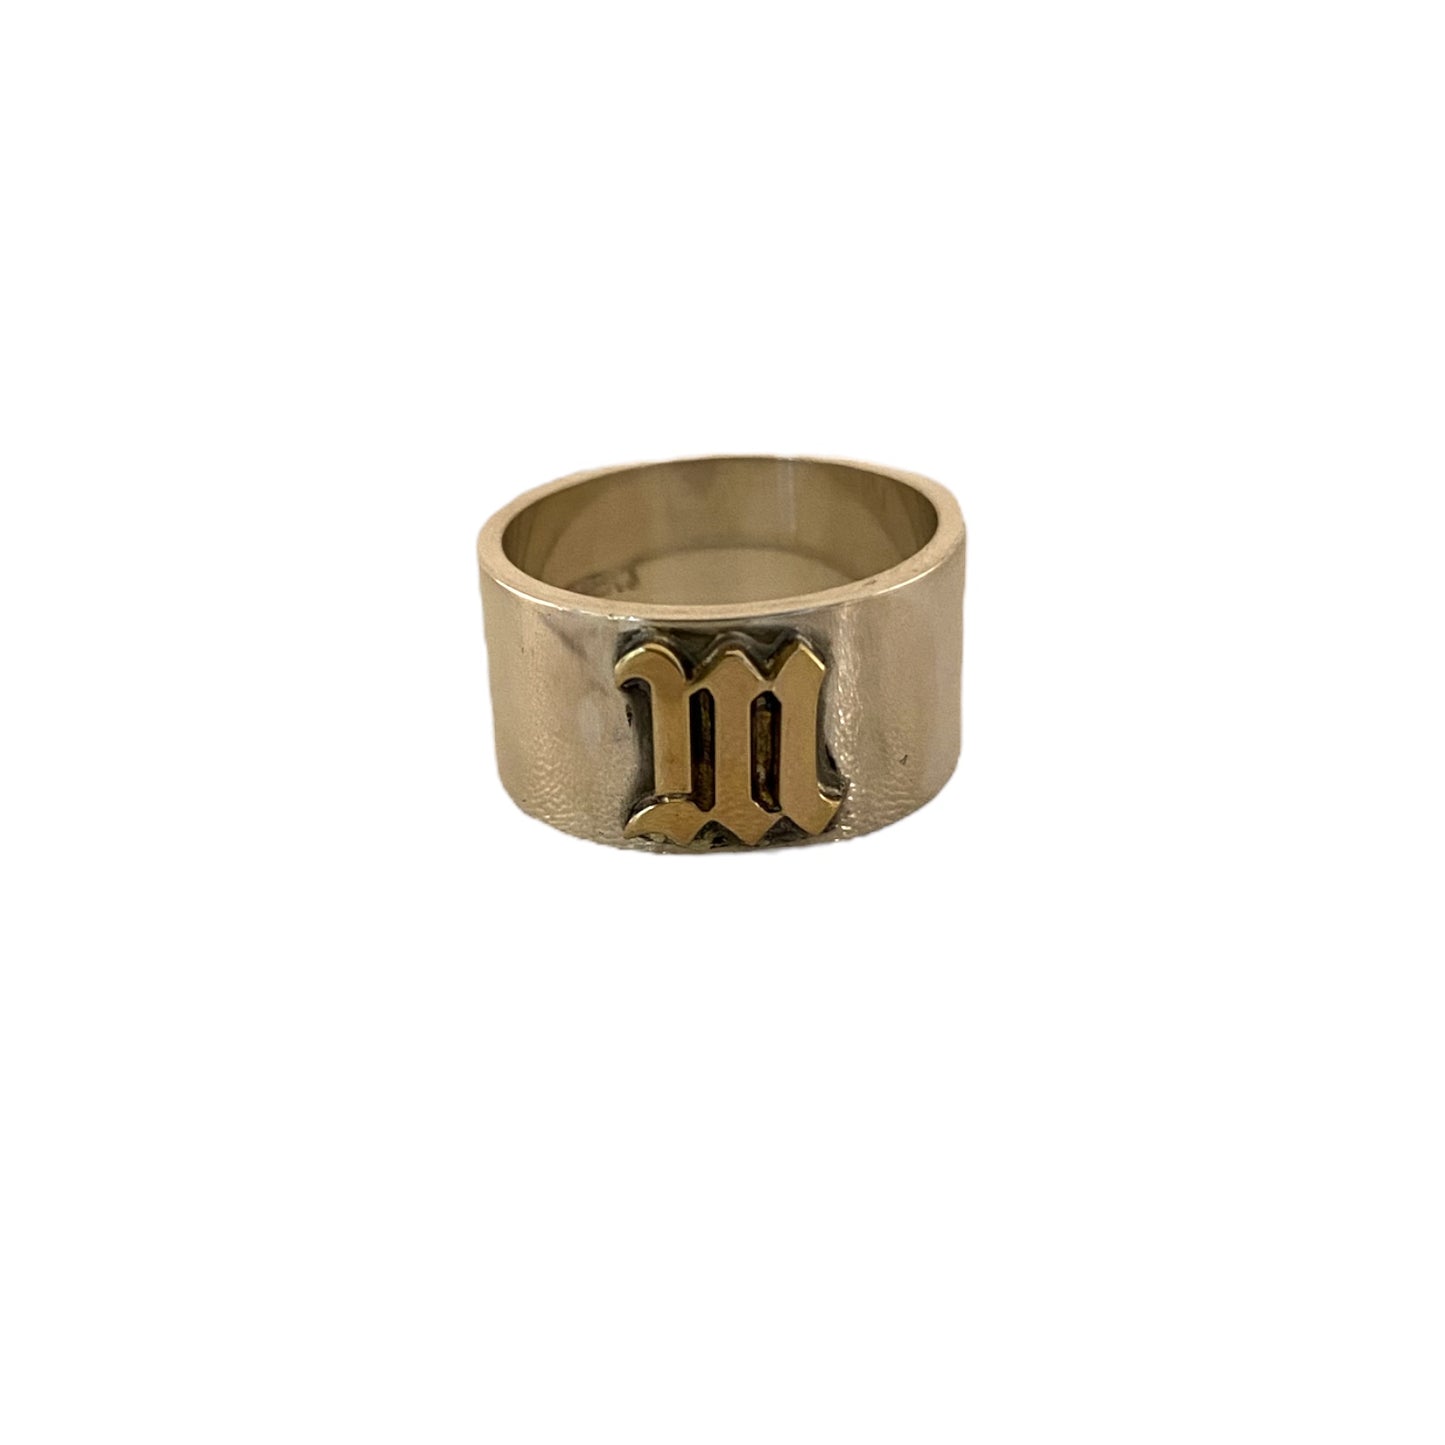 Silver Band with Gold Initial "M" Ring